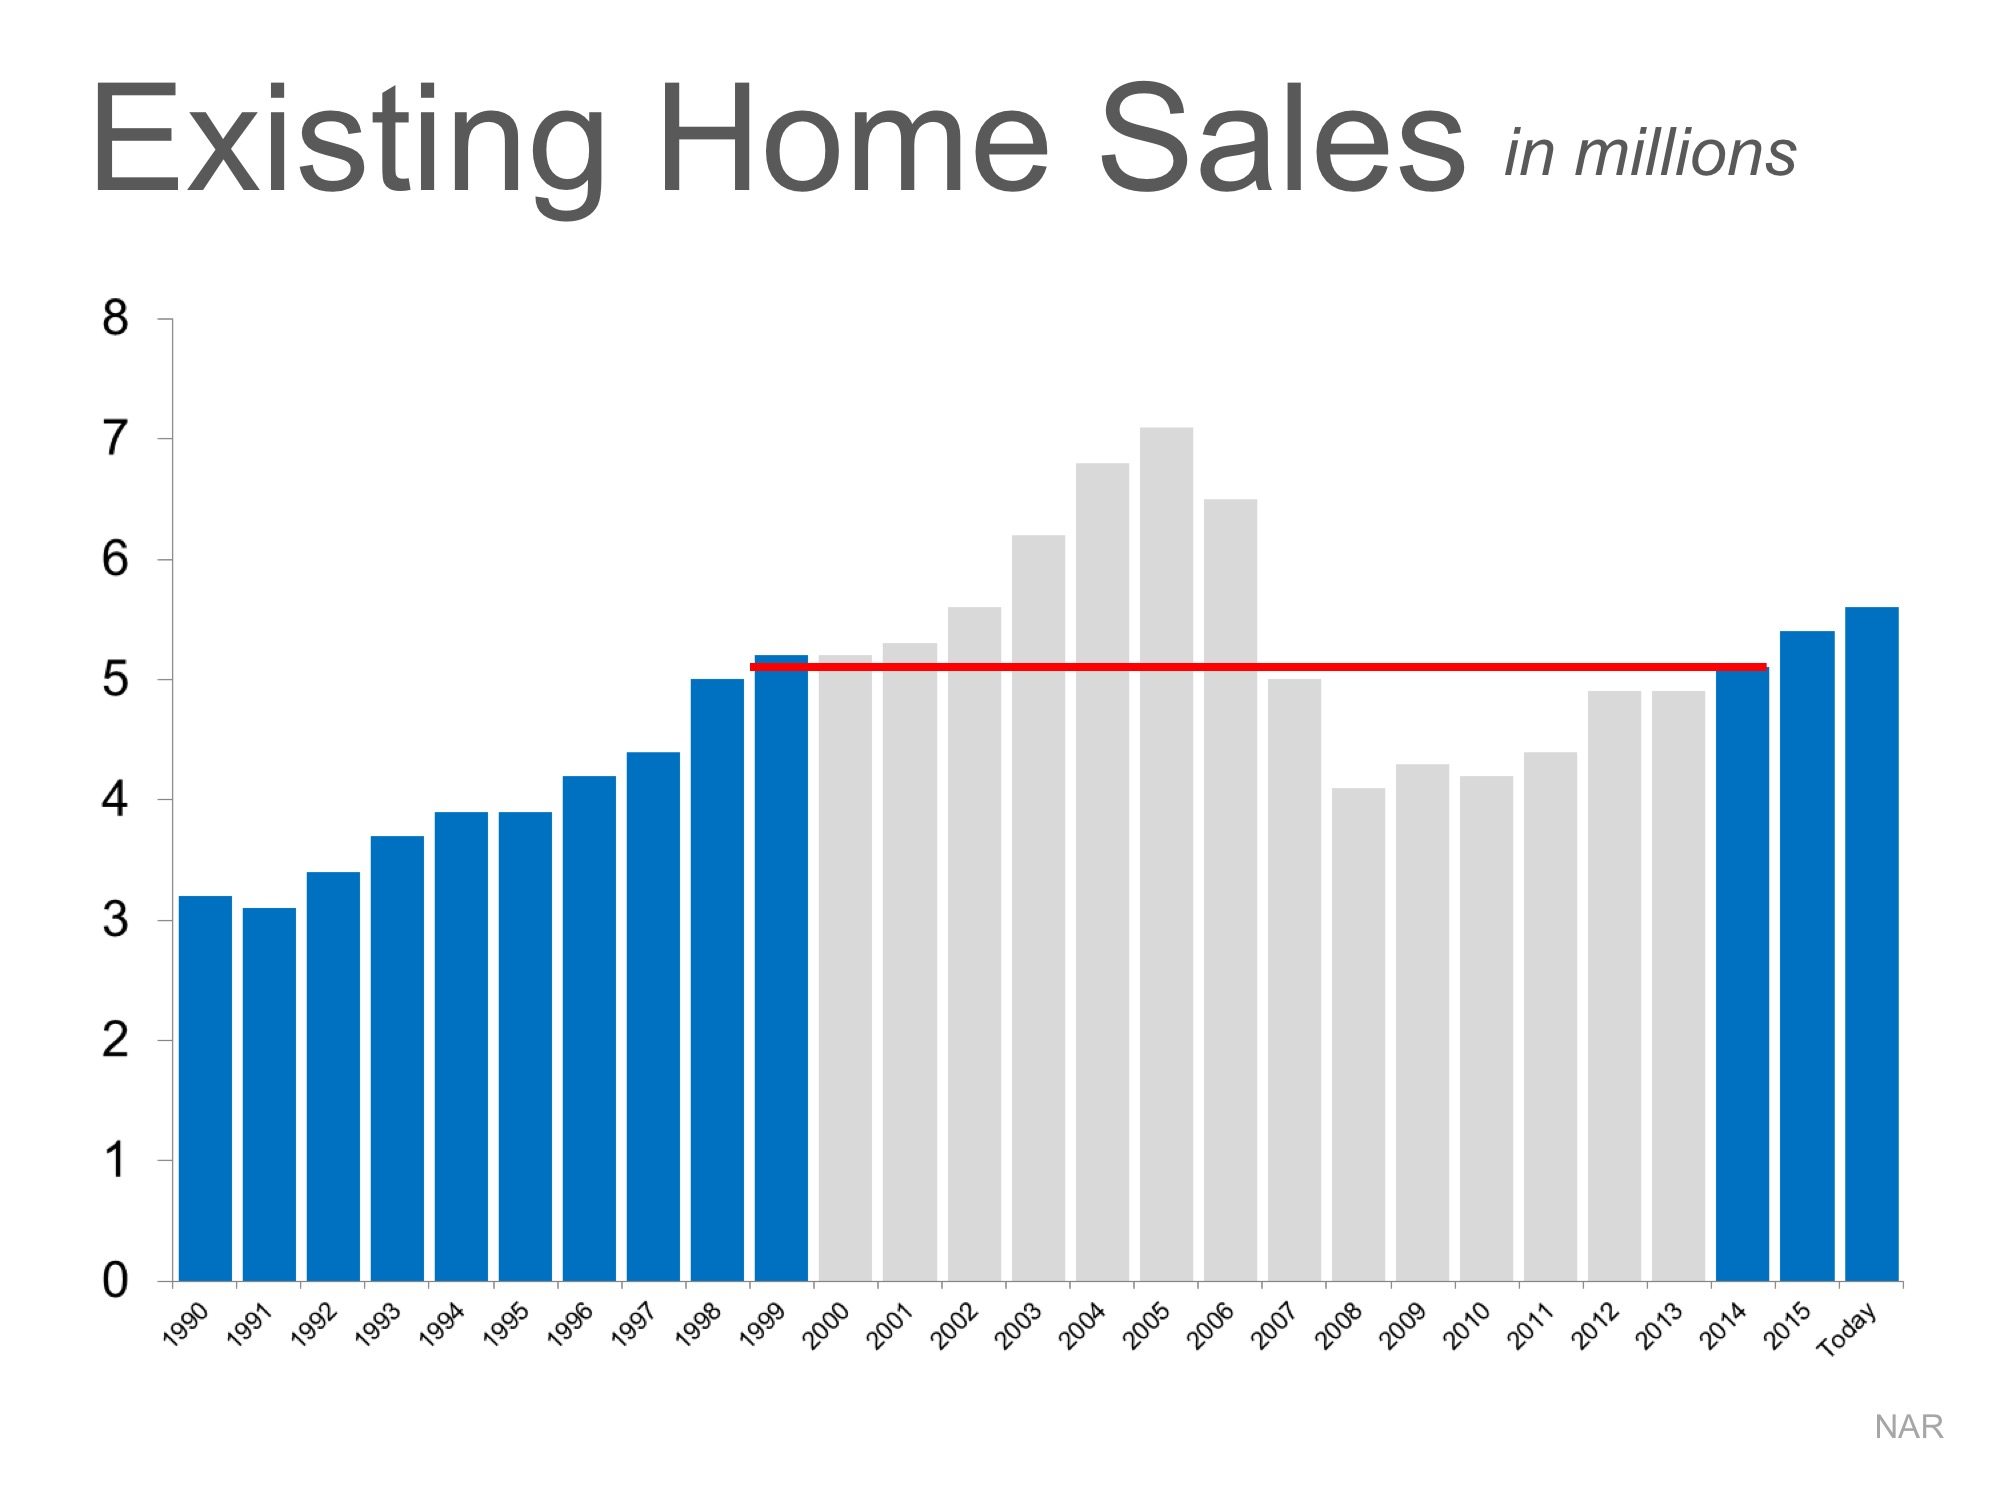 Is the Current Pace of Home Sales Sustainable?